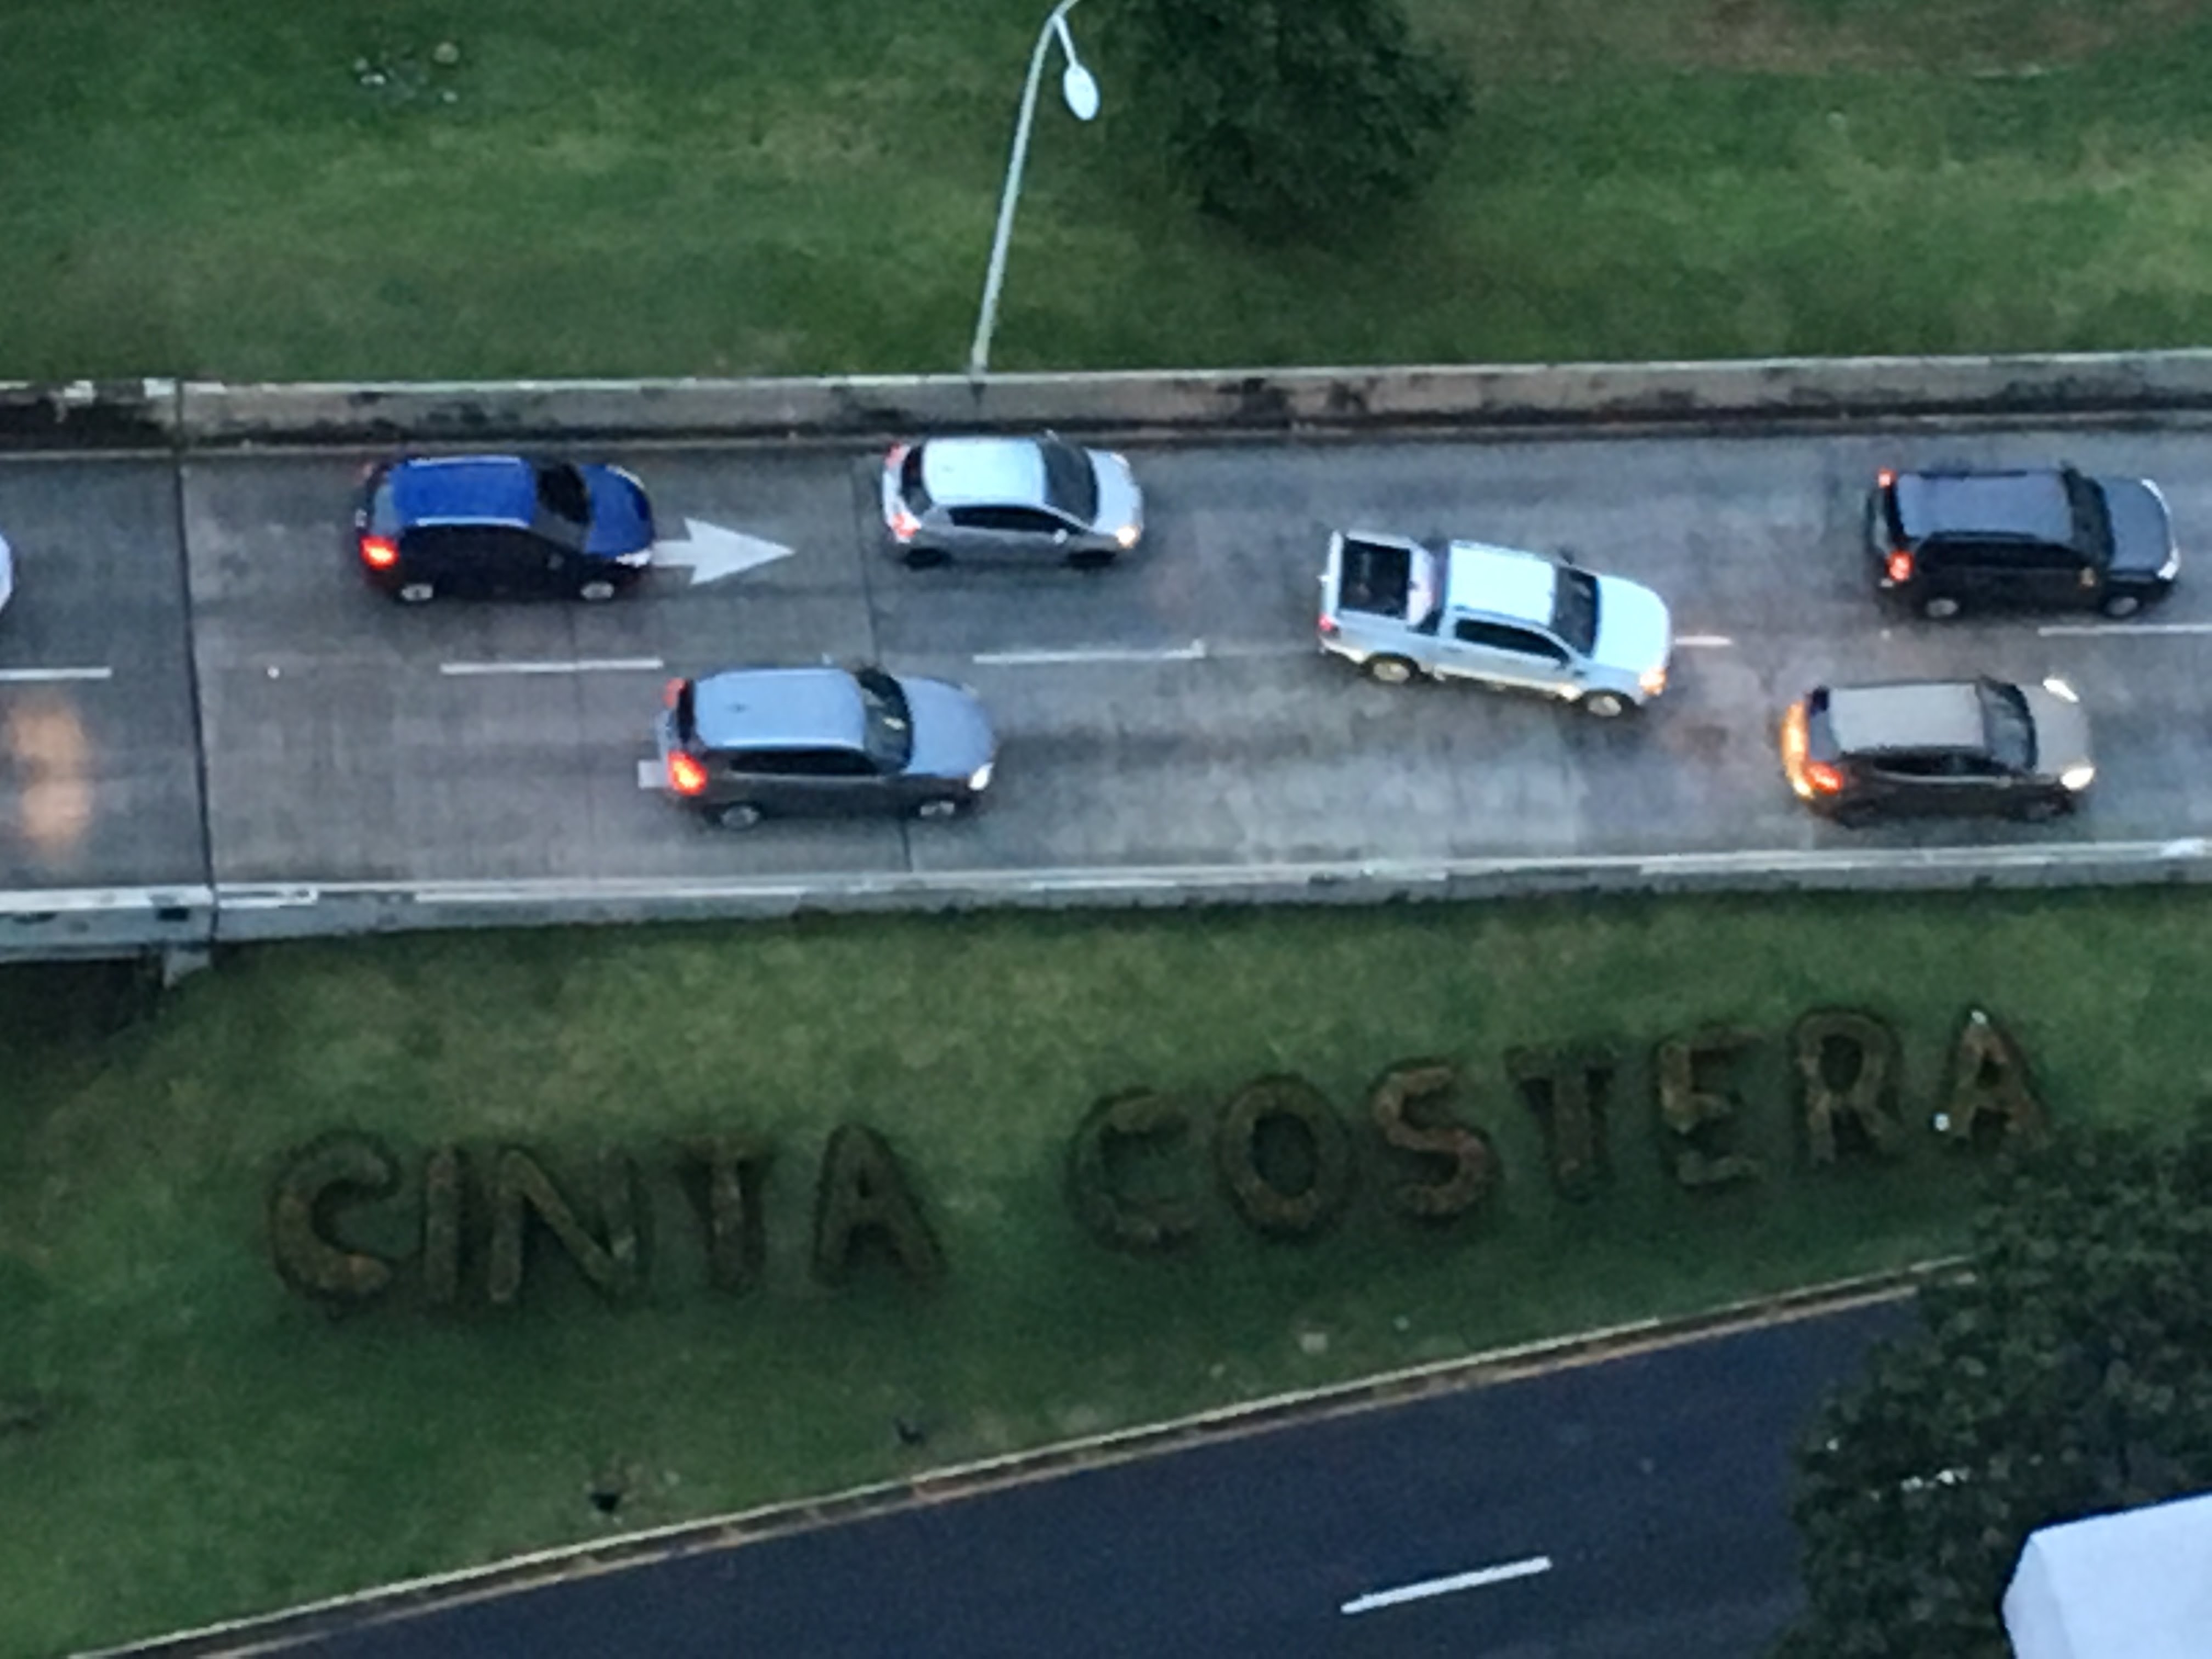 Cinta Costera - from the roof of our building